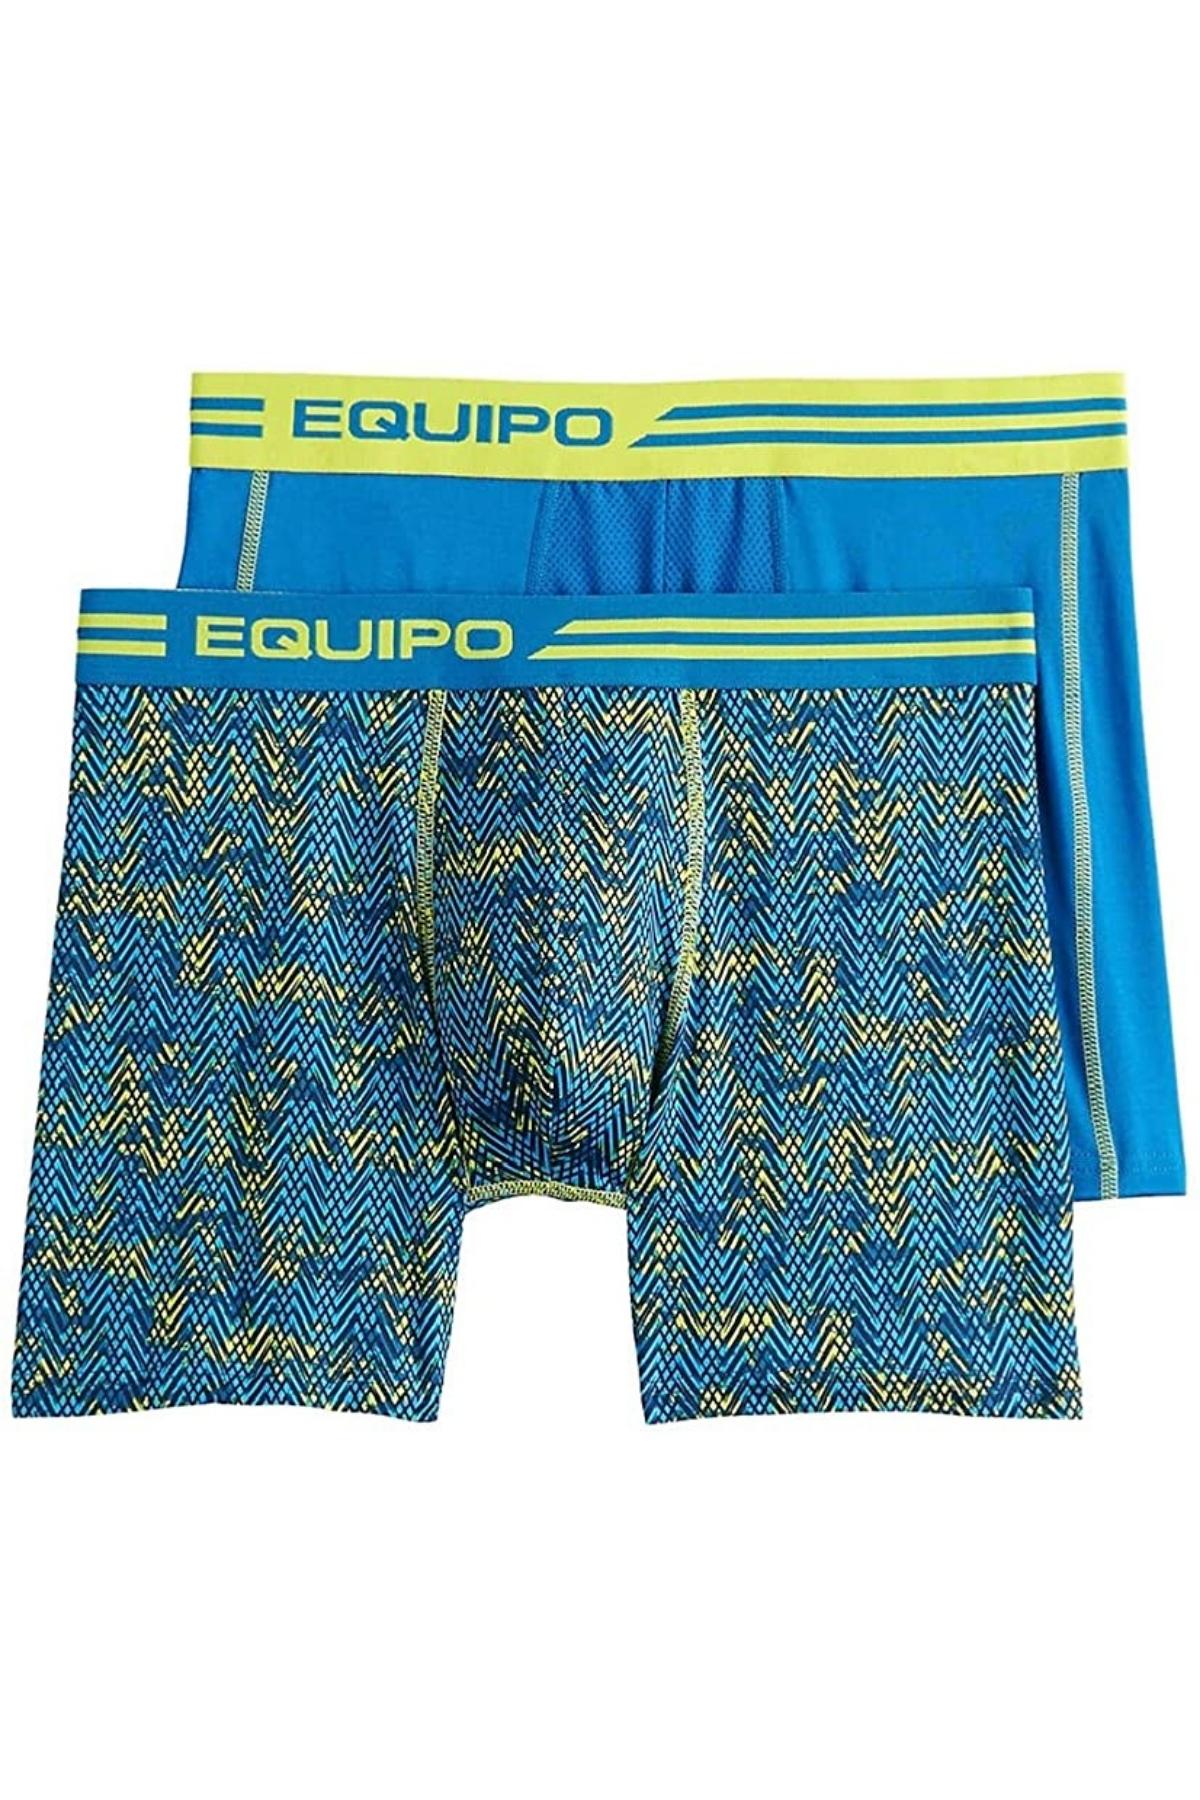 http://www.cheapundies.com/cdn/shop/products/Equipo-Teal-and-Lime-Quick-Dry-Performace-2-Pack-Boxer-Briefs_131265_5c996148-ff53-495a-b82f-09dd4219bd0e.jpg?v=1646758561